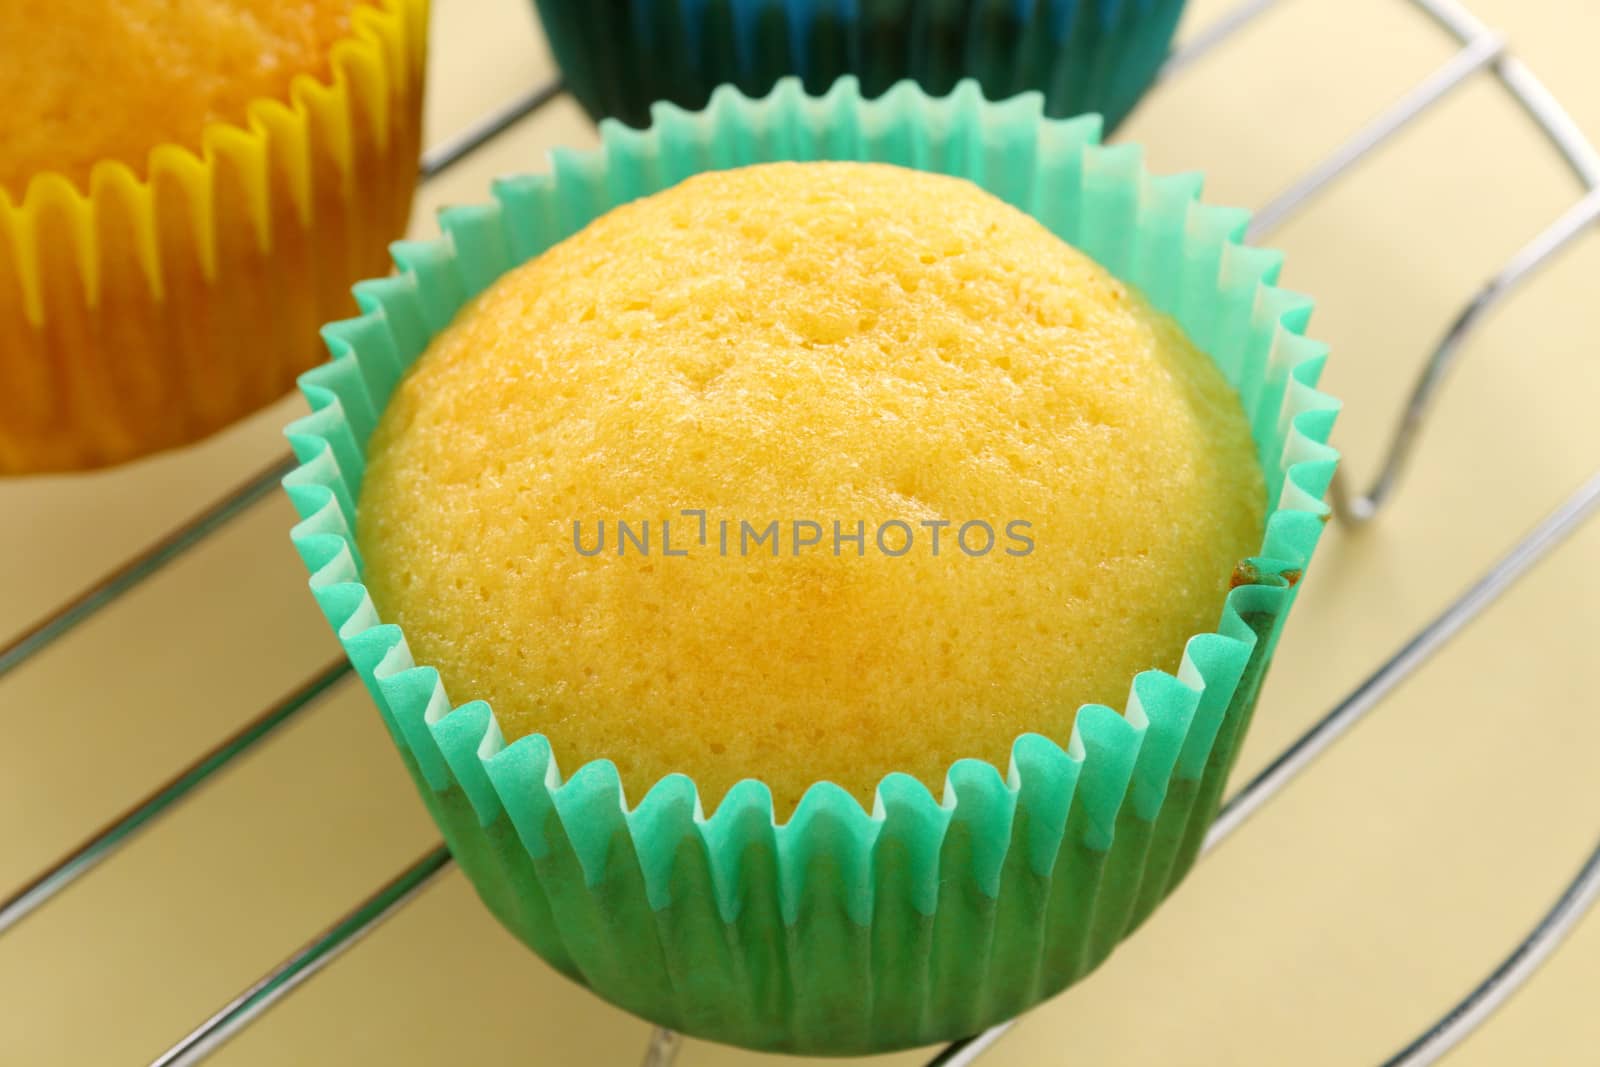 A fresh baked cup cake straight from the oven.